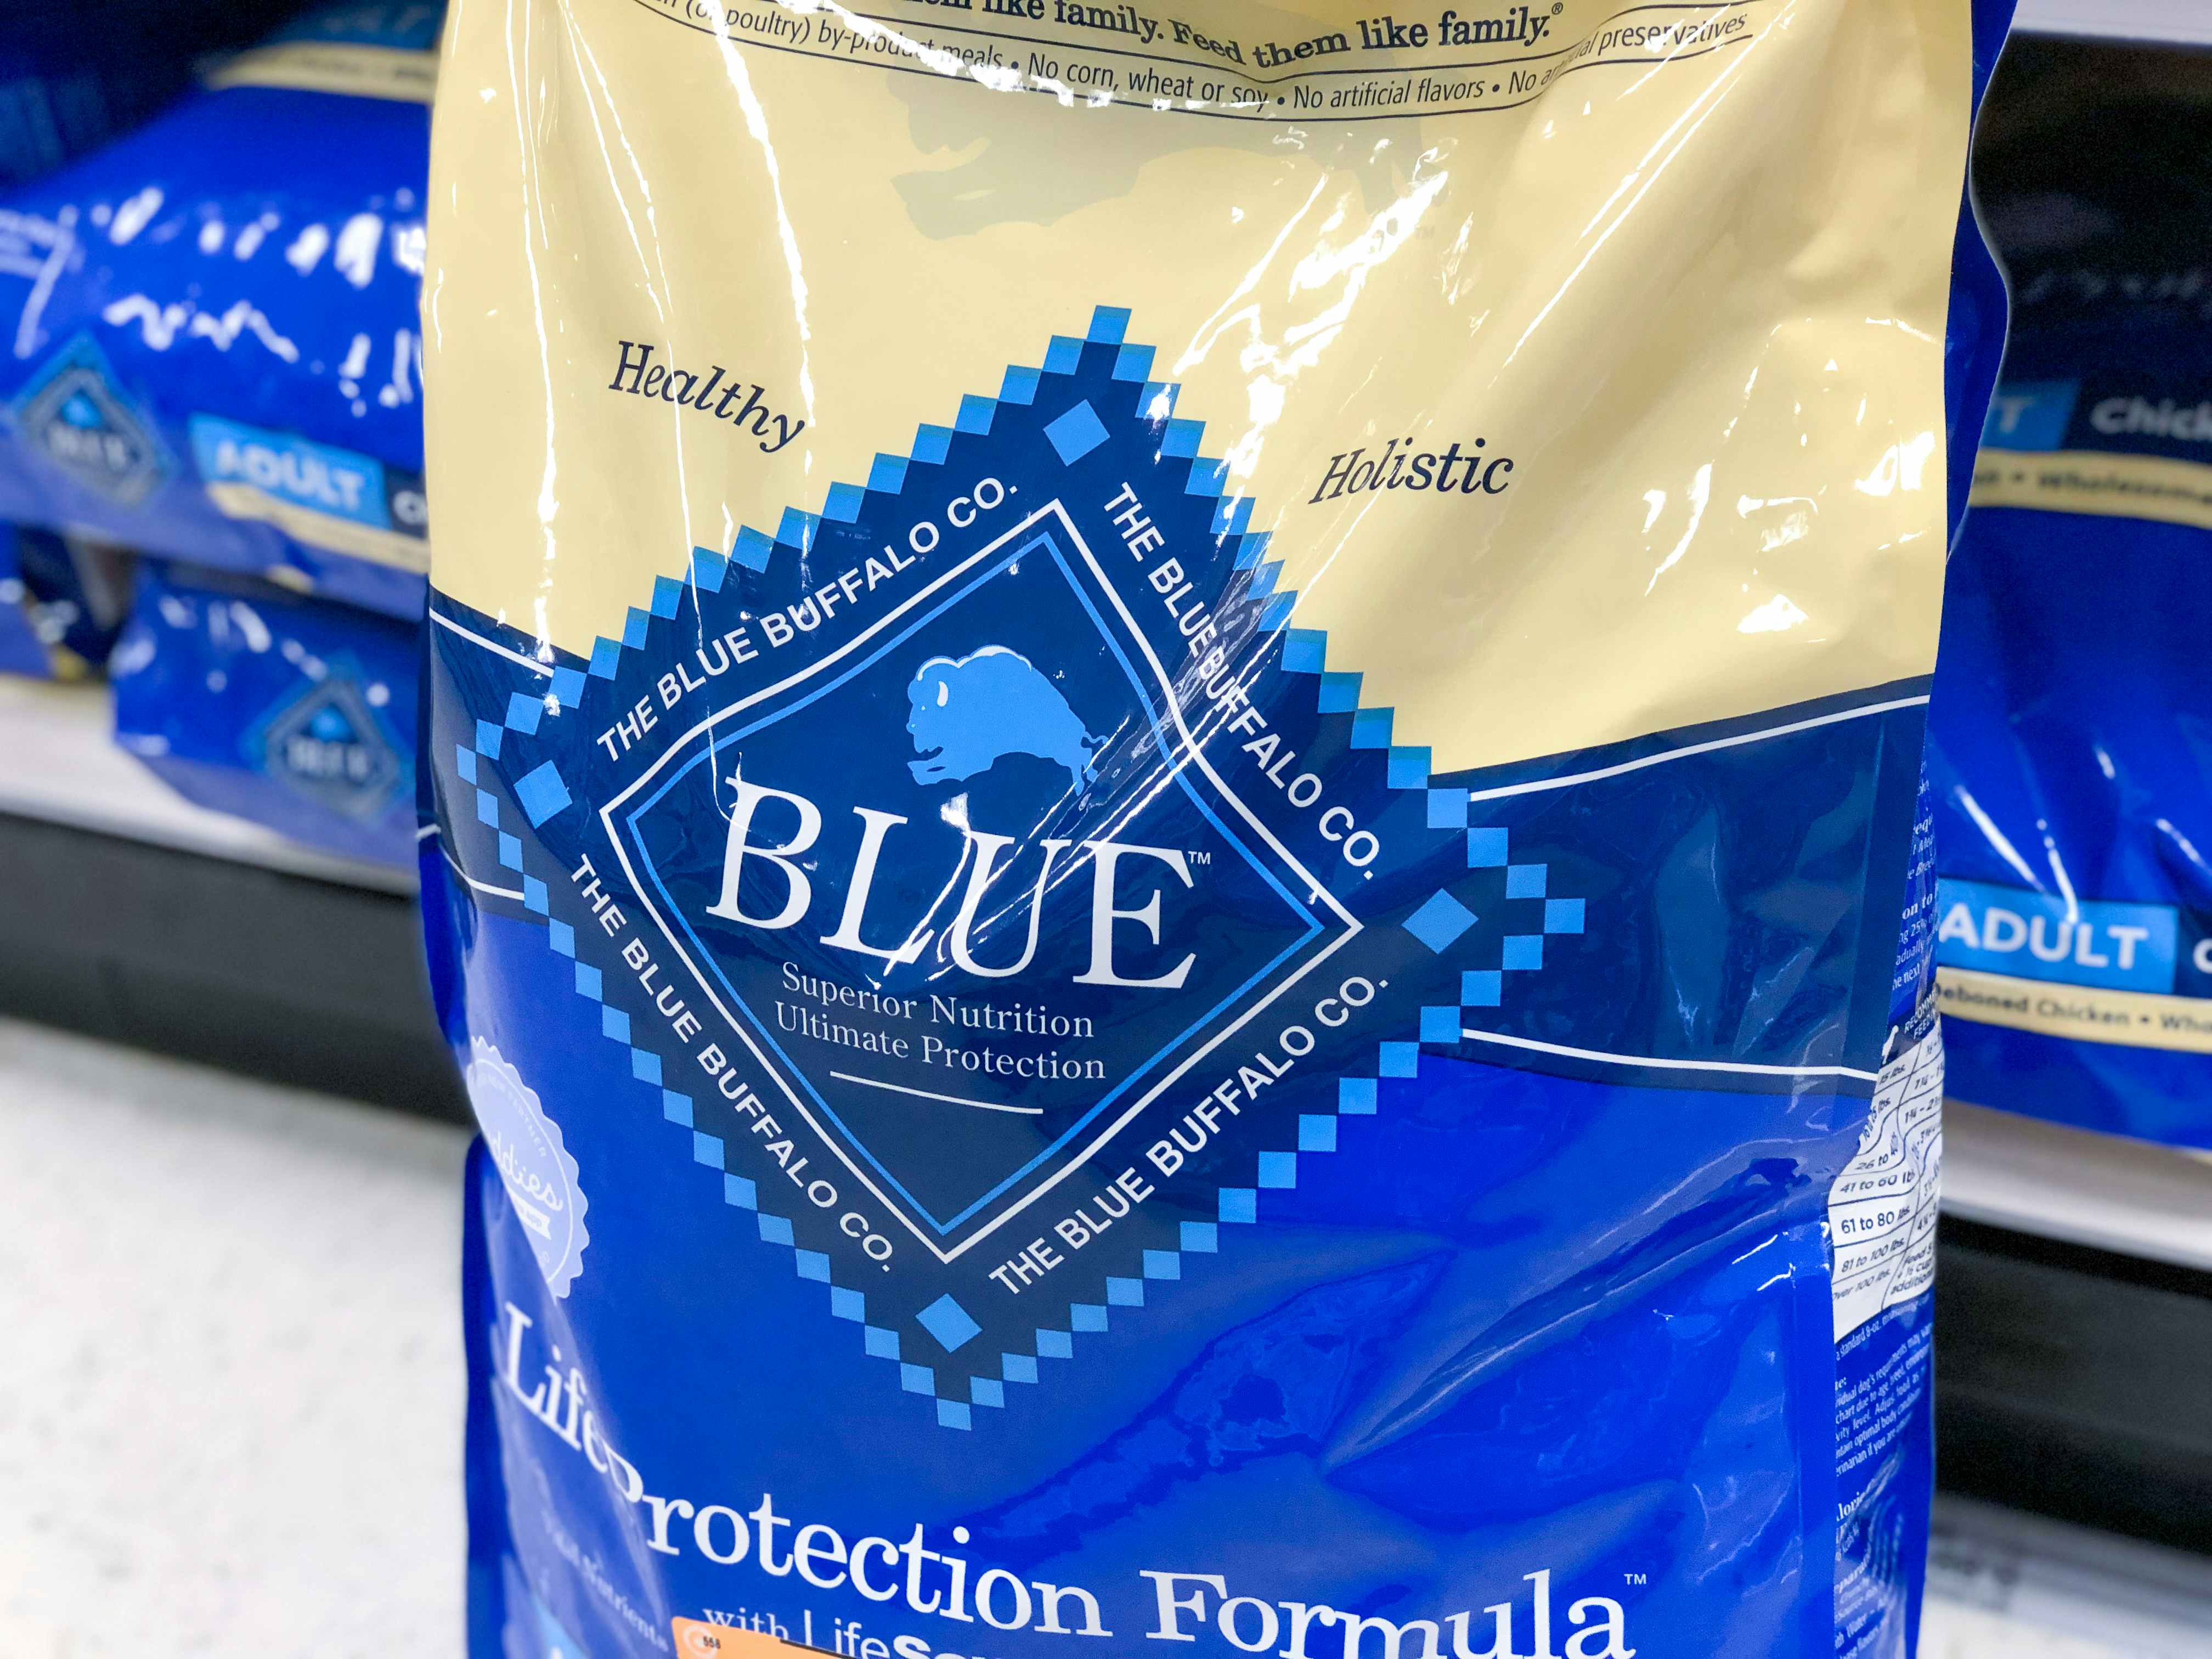 A bag of Blue Buffalo dog food in a store aisle.